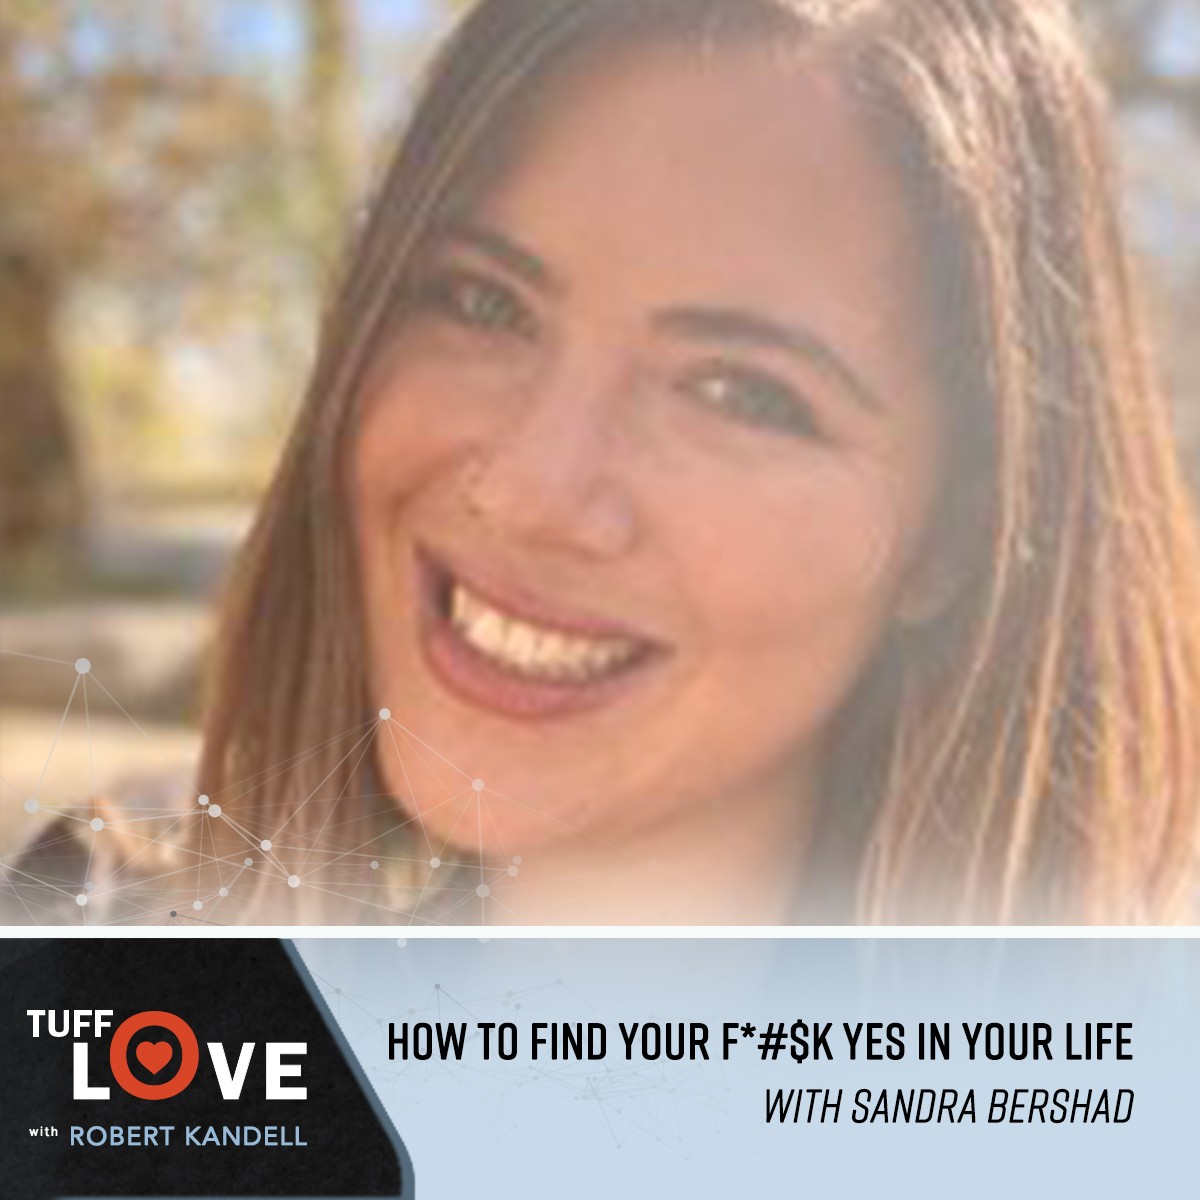 236:  How to Find Your F*#$k Yes in Your Life with Sandra Bershad